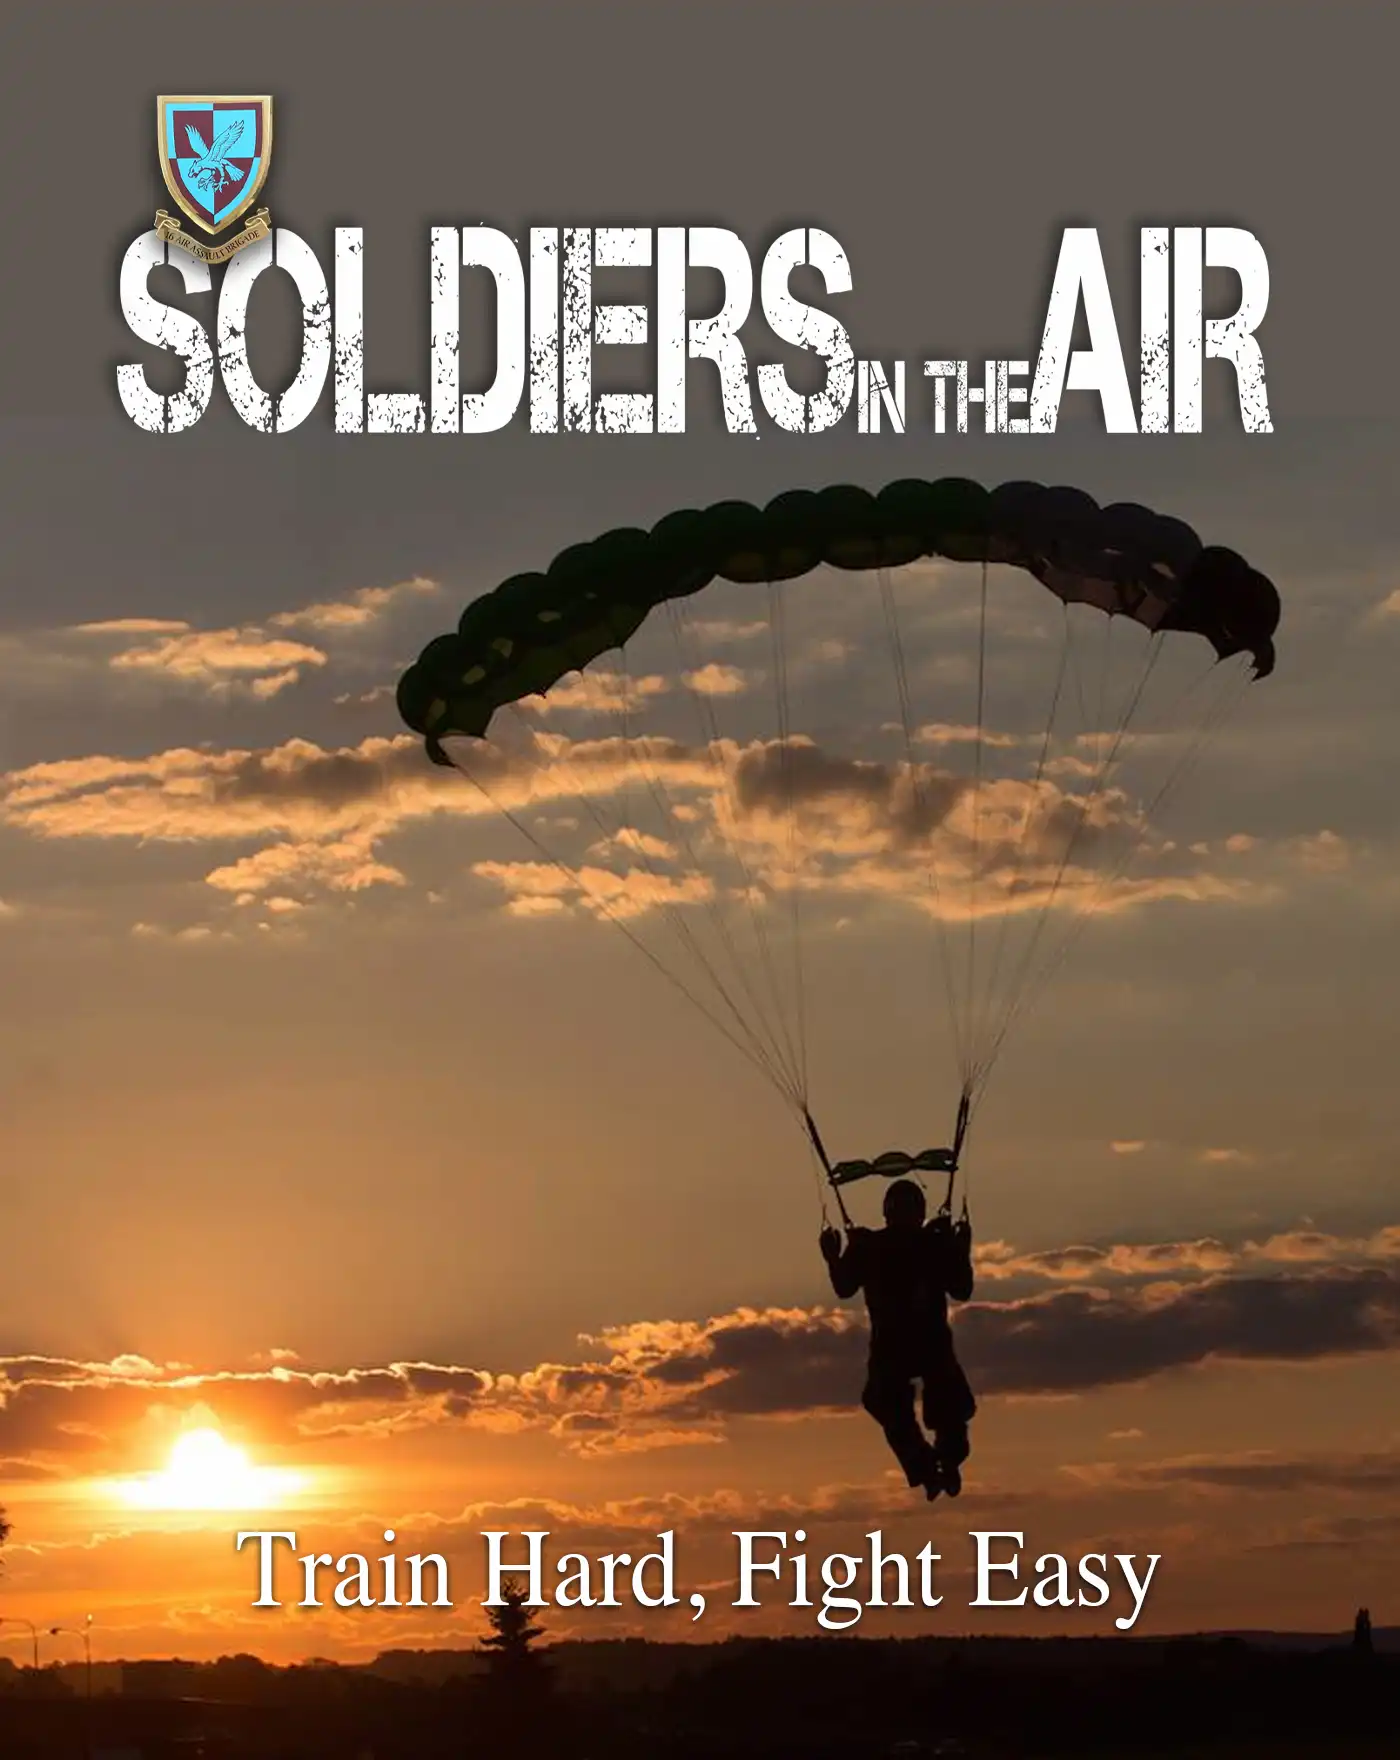 Soldiers in the Air. Train Hard, Fight Easy